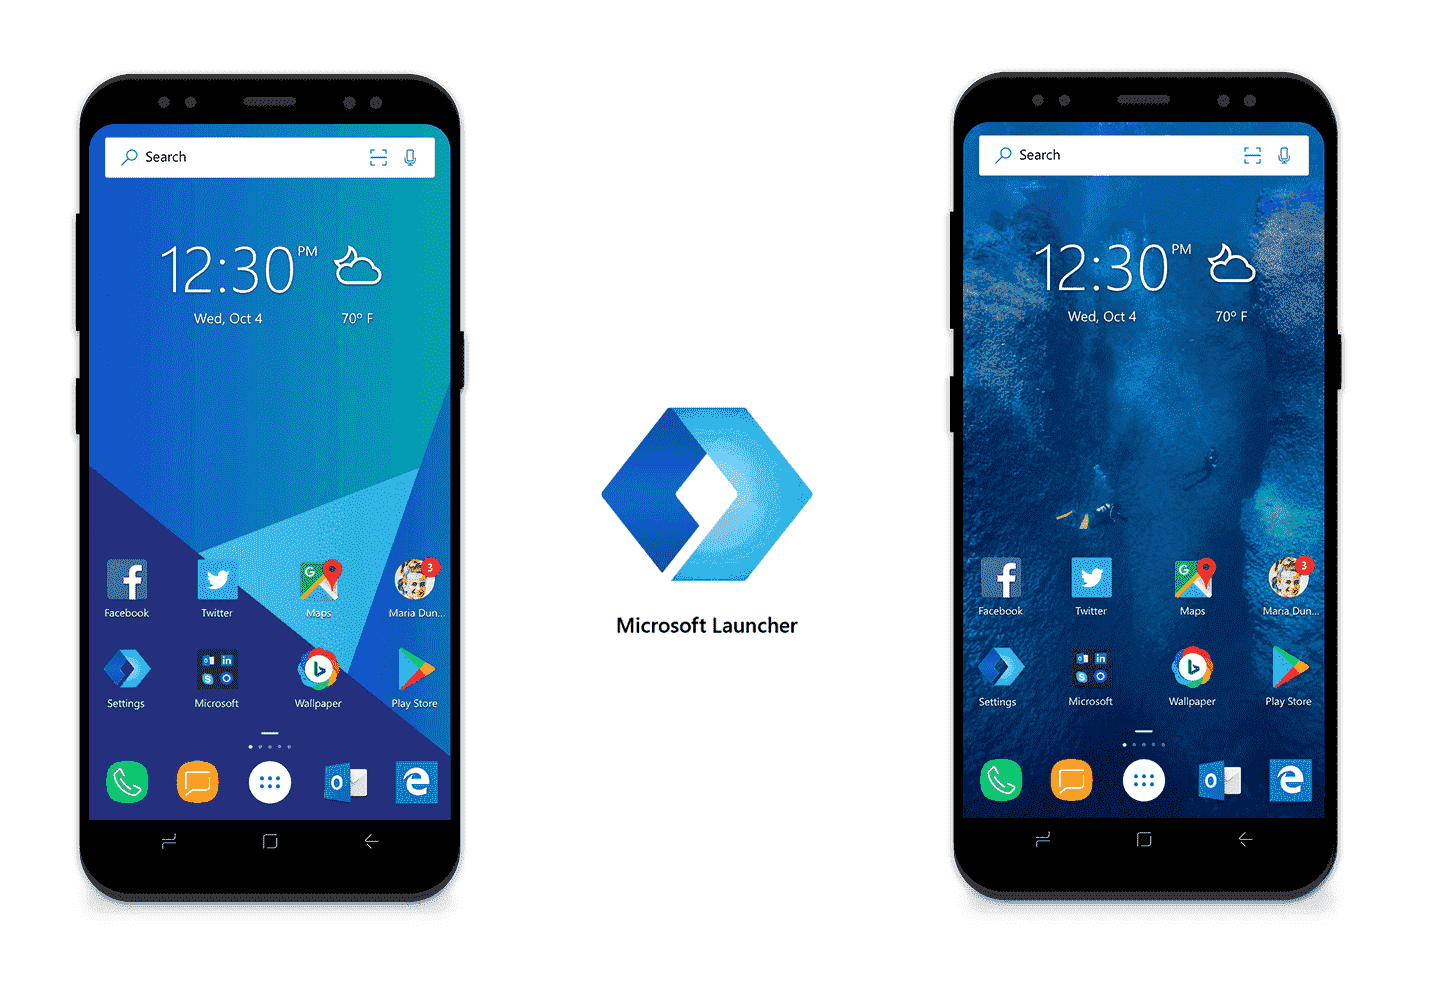 New Microsoft Launcher app 4.10 version for Android f8d914f0746fe7594075d0b98171885f.png